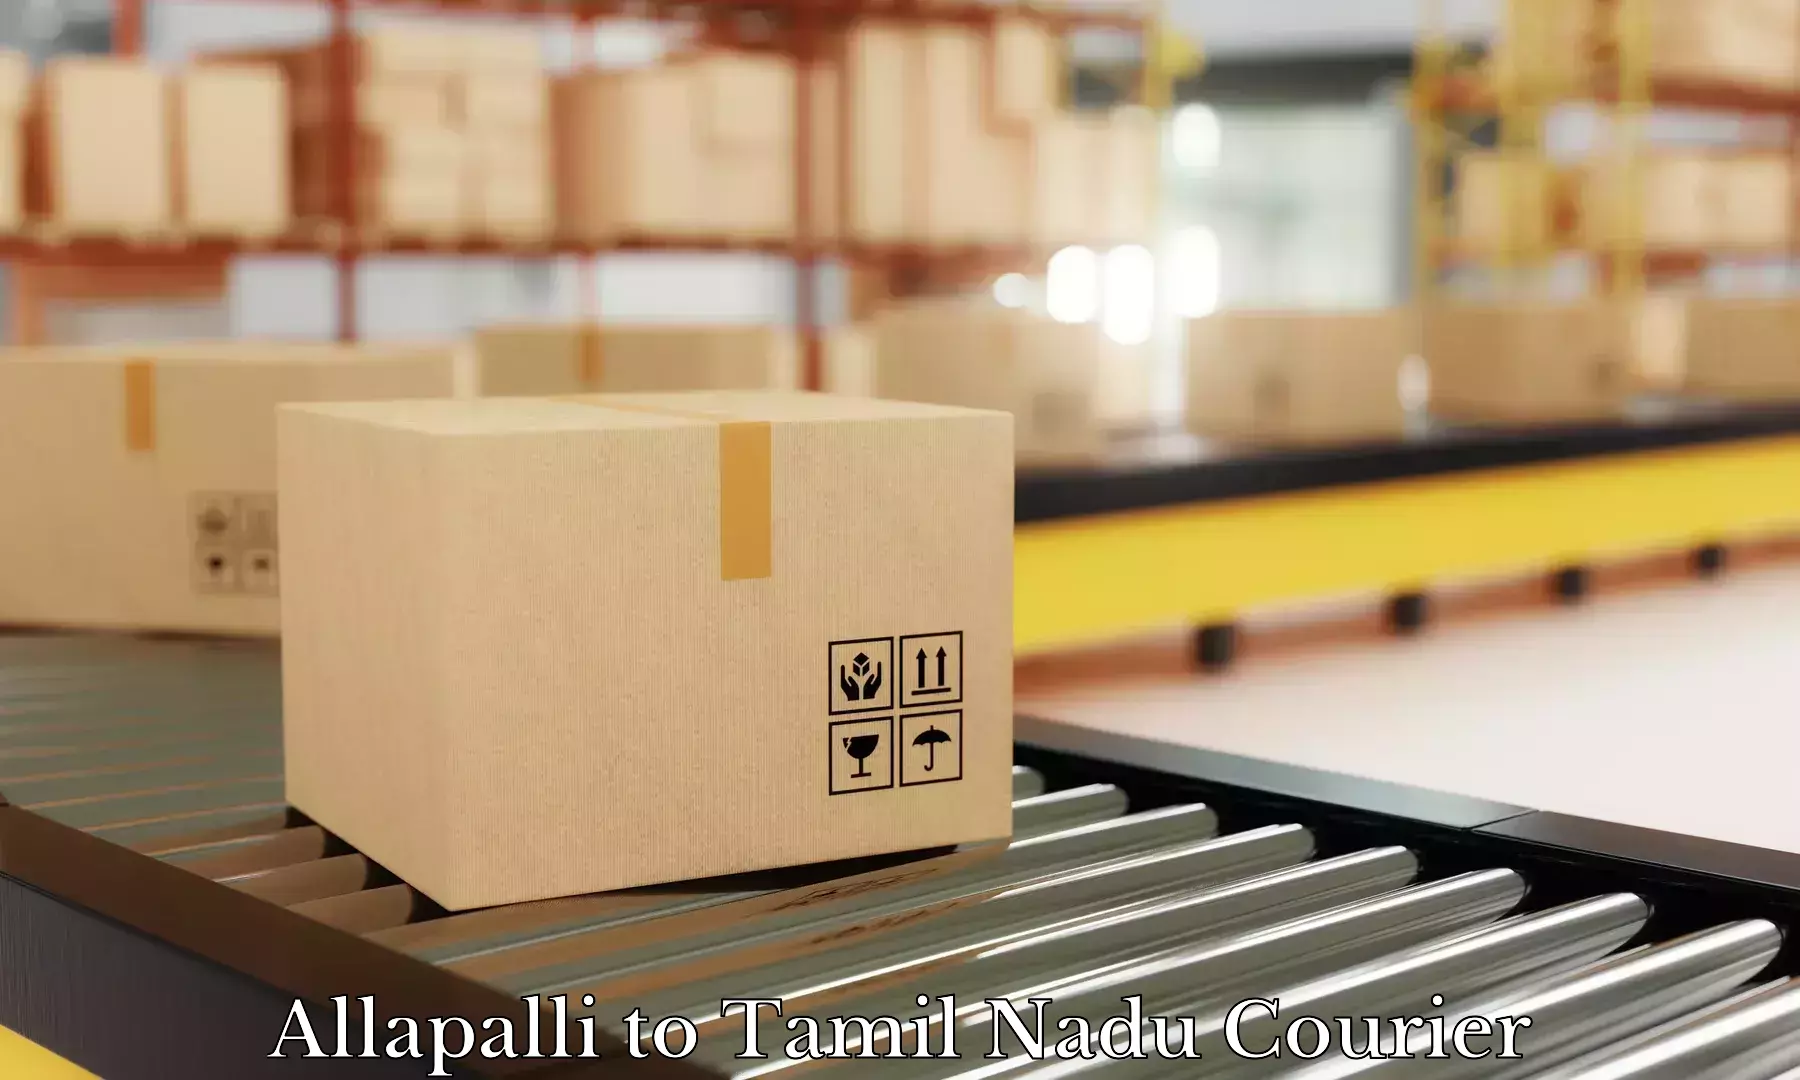 Luggage shipment specialists Allapalli to Pushpavanam